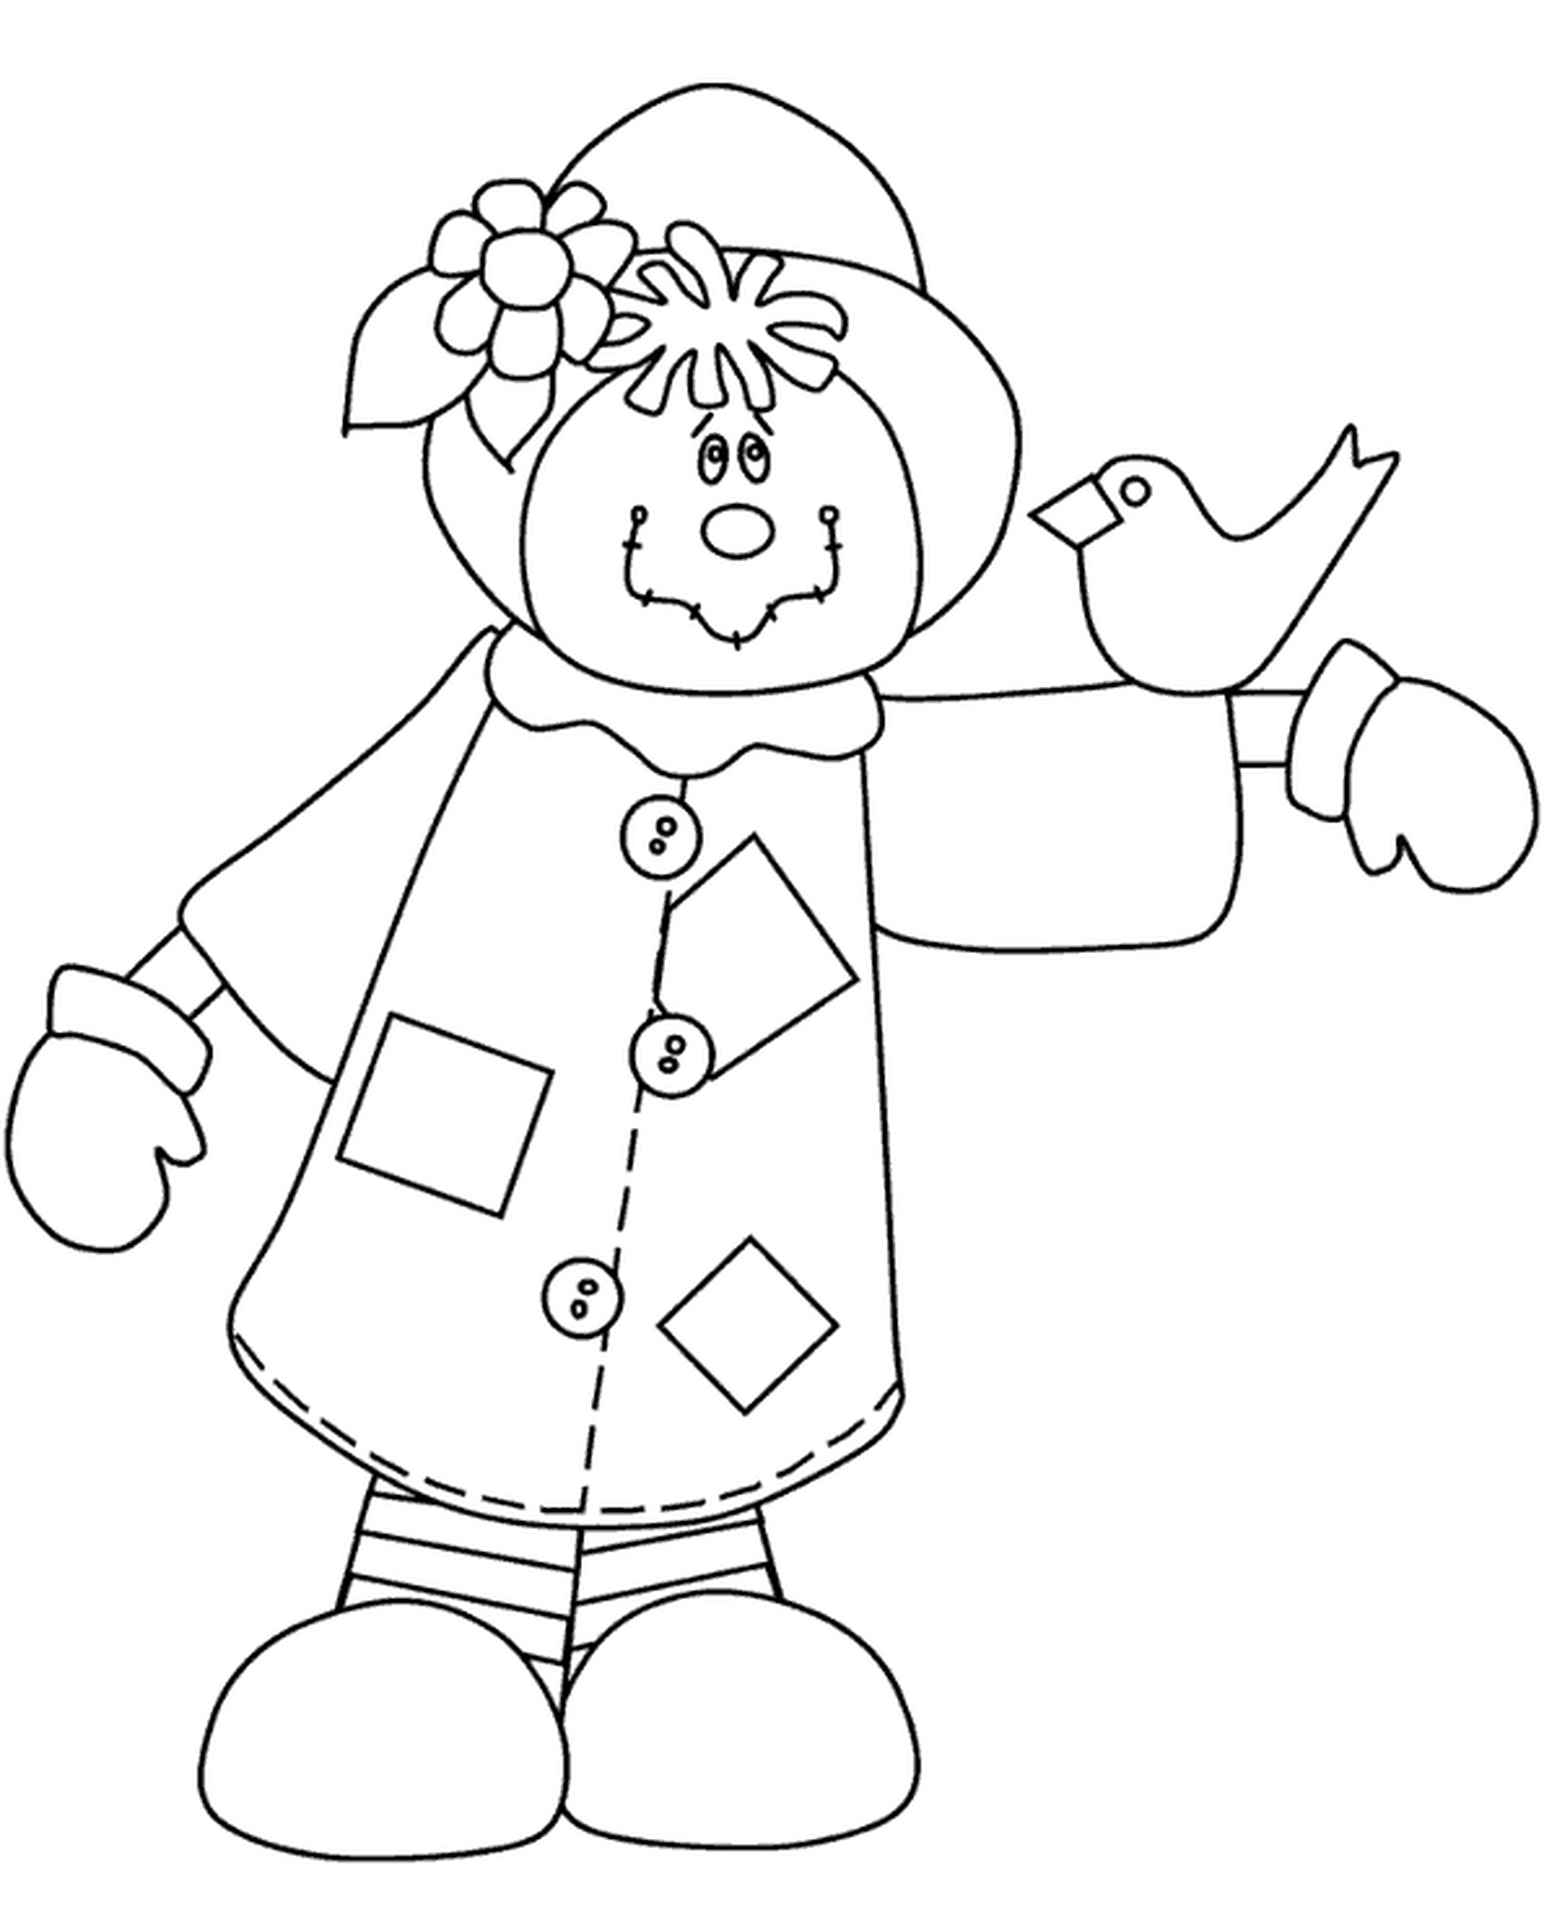 friendly scarecrow coloring page